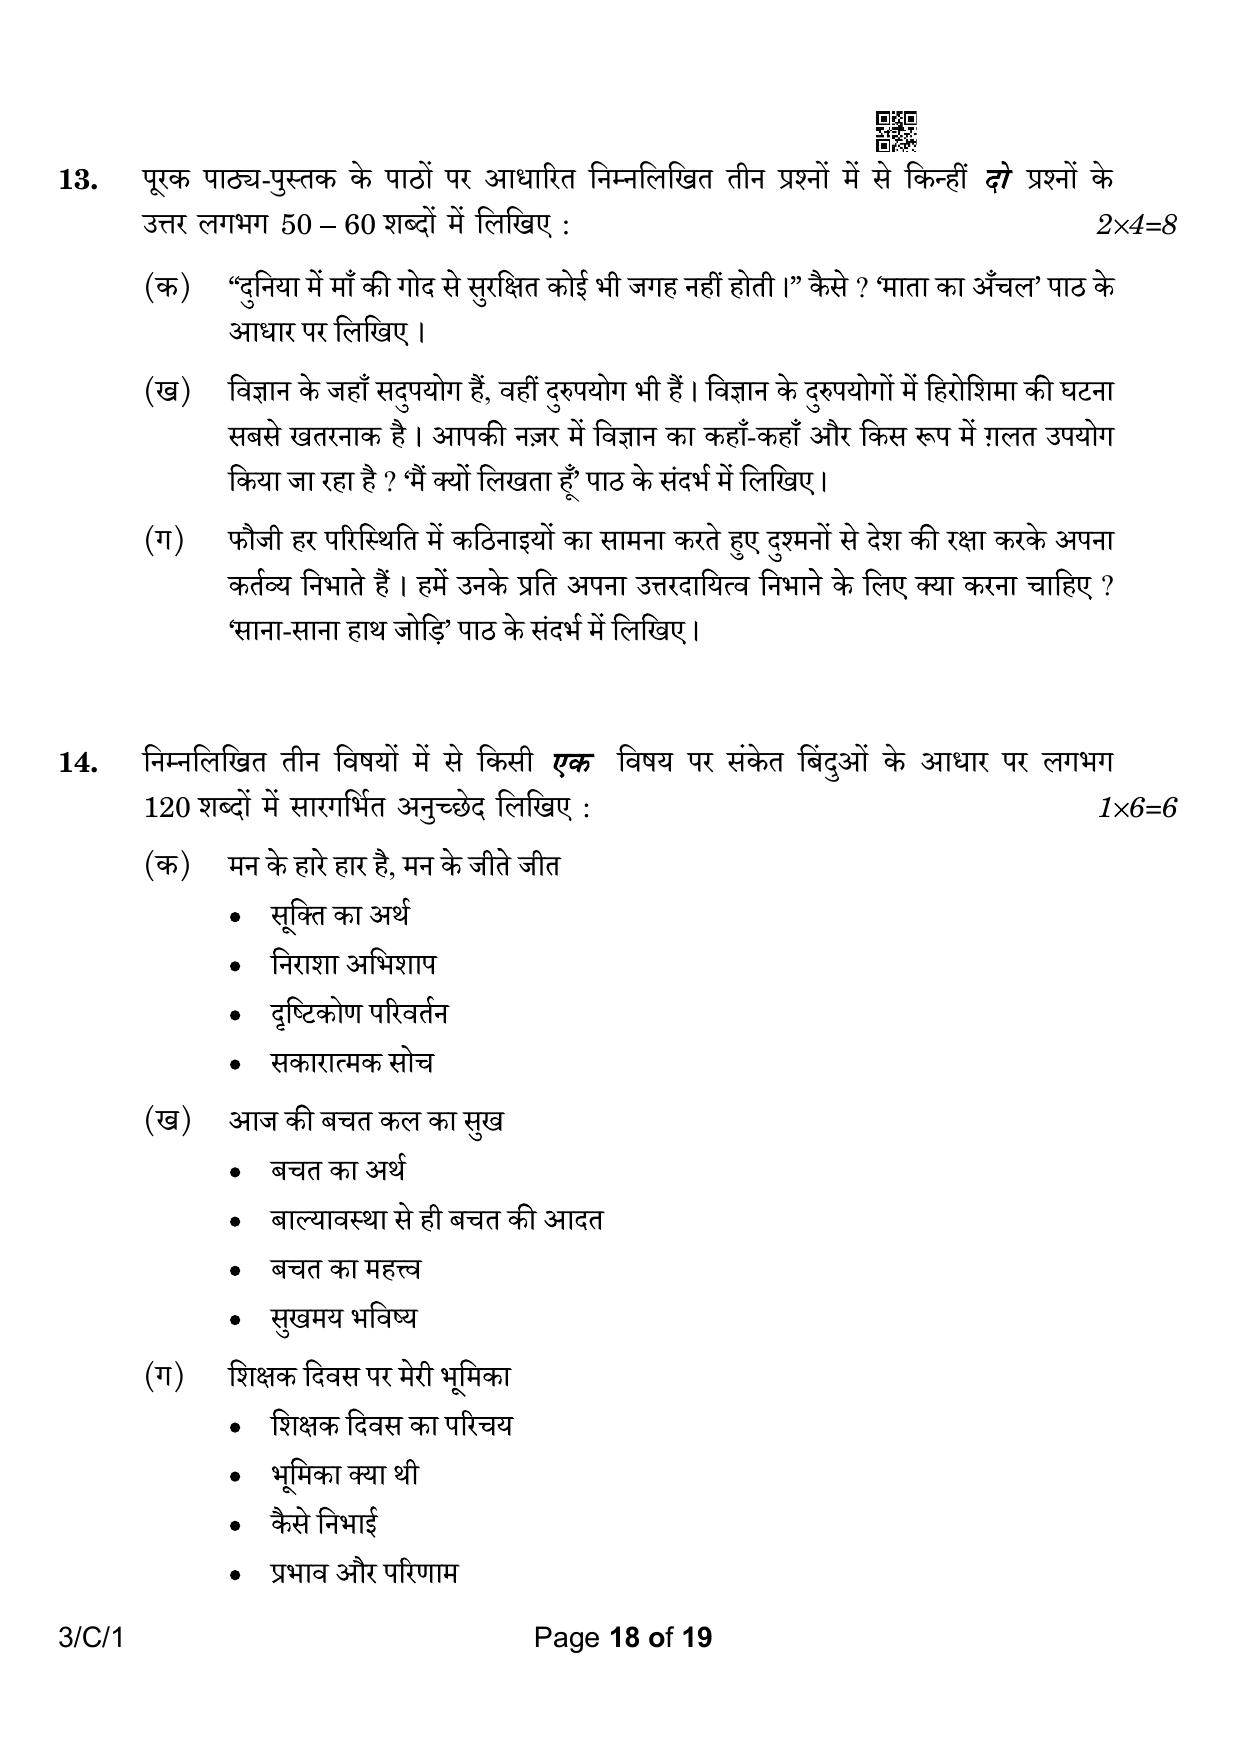 CBSE Class 10 3-1 Hindi A 2023 (Compartment) Question Paper - Page 18